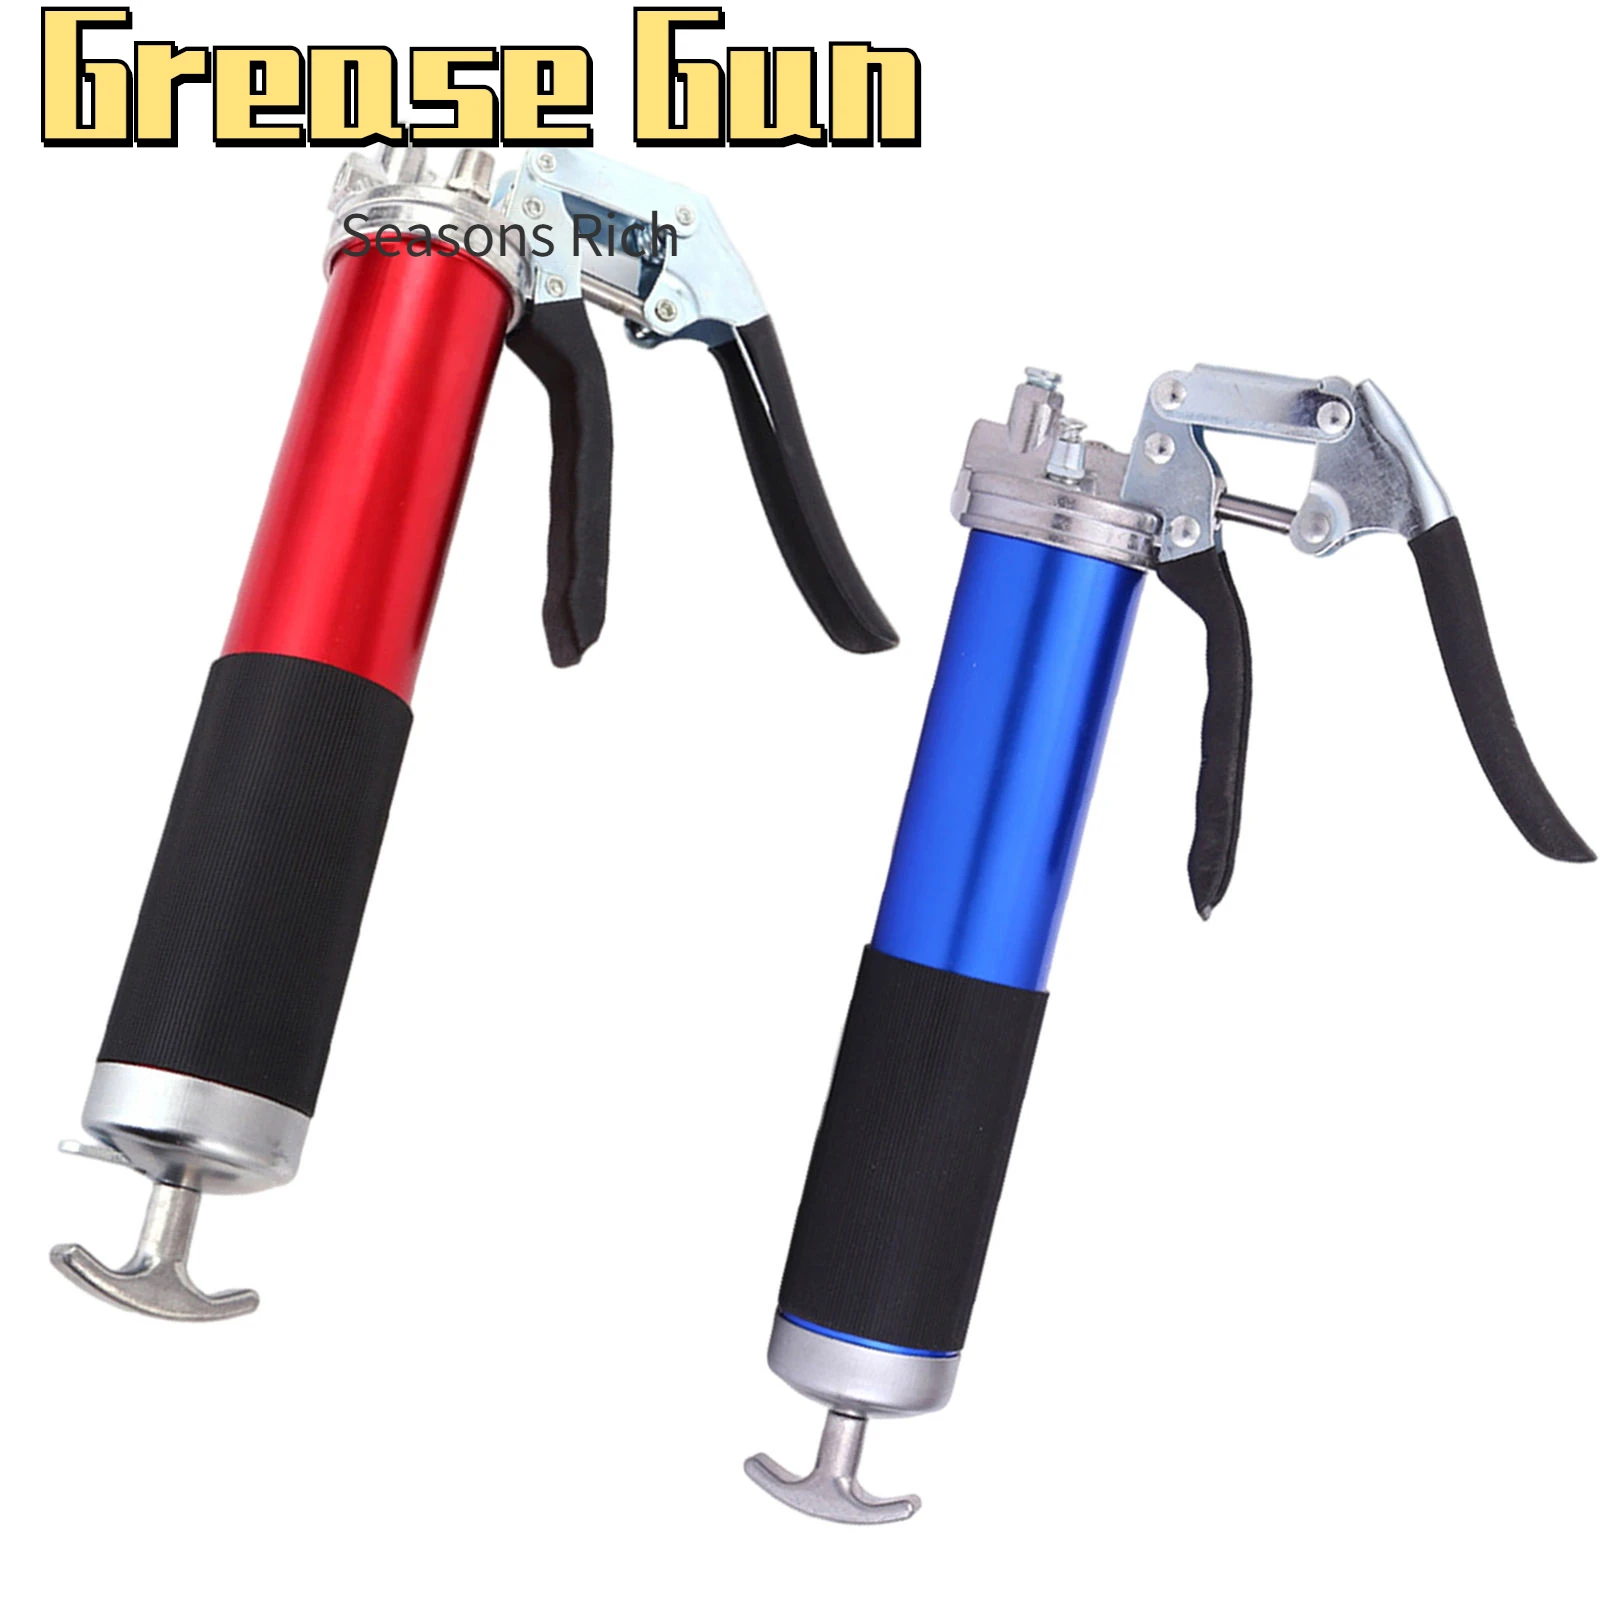 

2022 New Heavy Duty Metal High Pressure 10000 PSI 400cc Grip Grease Gun Greasing Injection W/ Hose for Automobile Tool